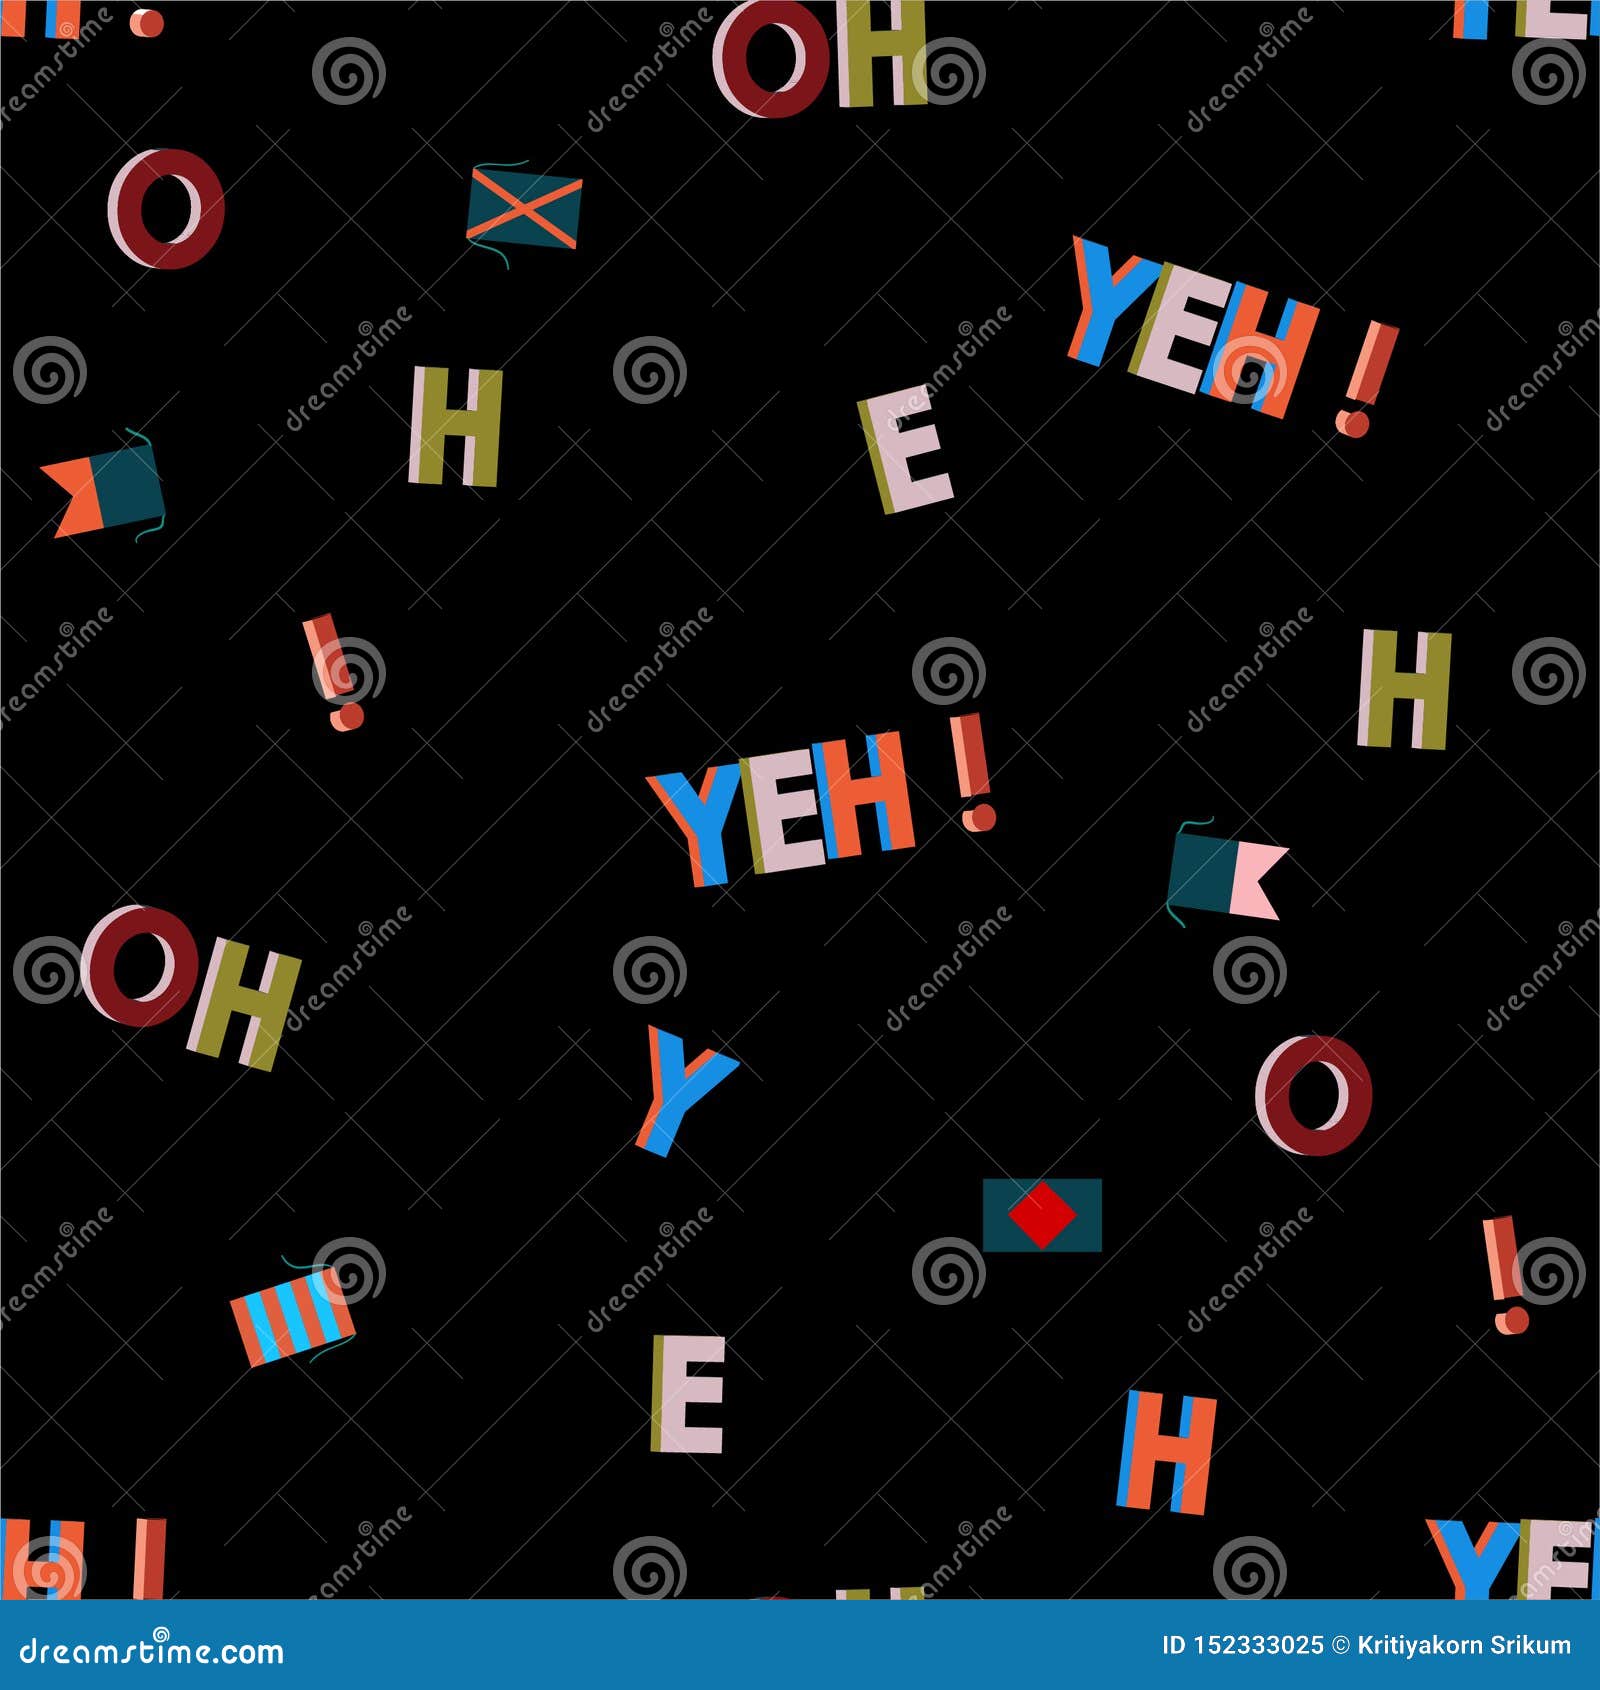 stylish trndy and colorful typo in wordingÃ¢â¬Âoh yeh!Ã¢â¬Â seamless pattern   for fashion, fabric, wallpaper and all